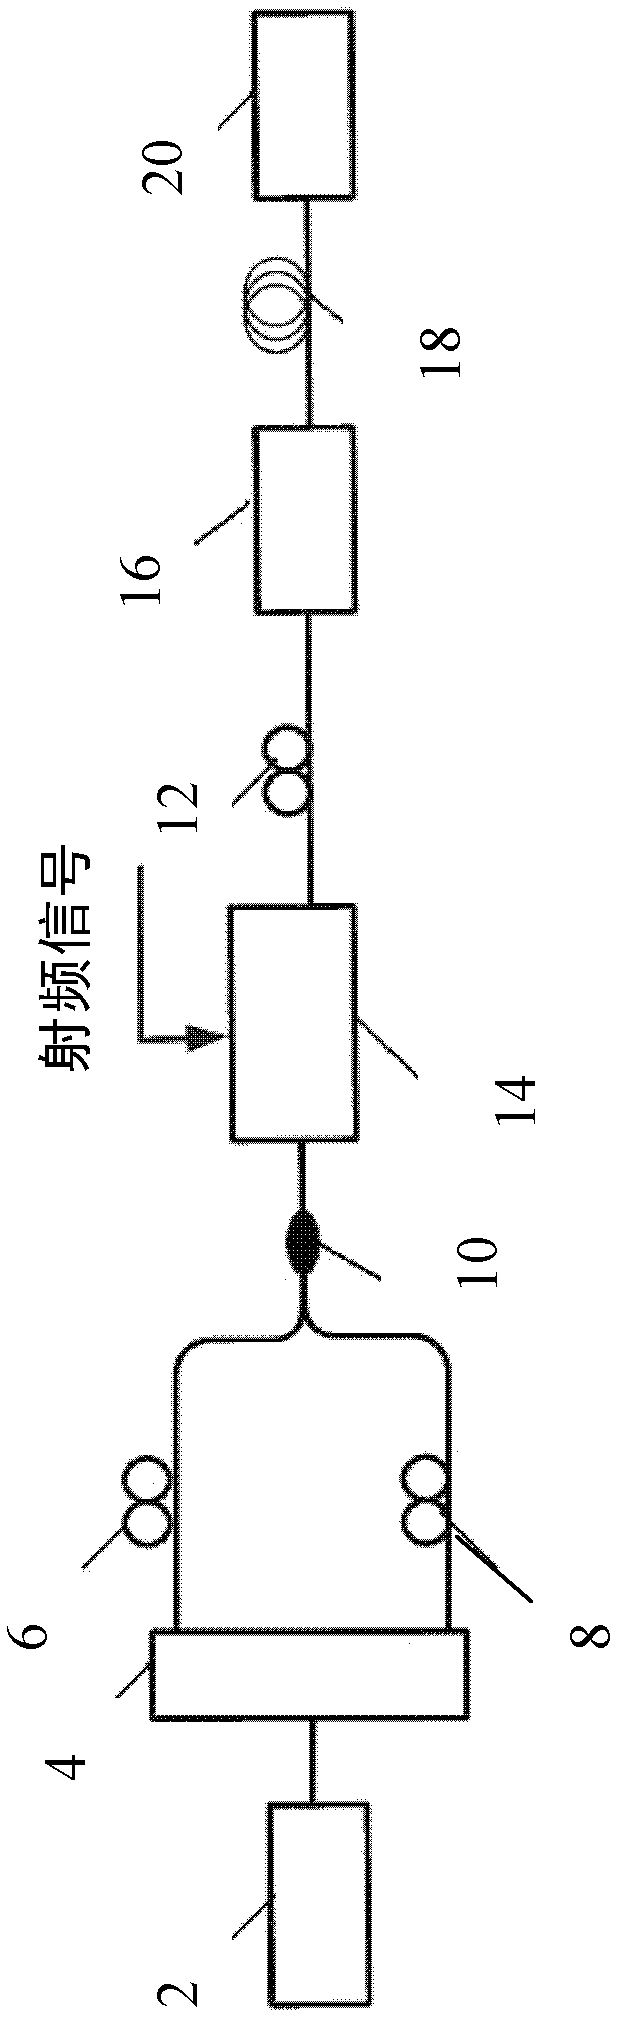 Broadband radio frequency remote optical transmission link and transmission method thereof